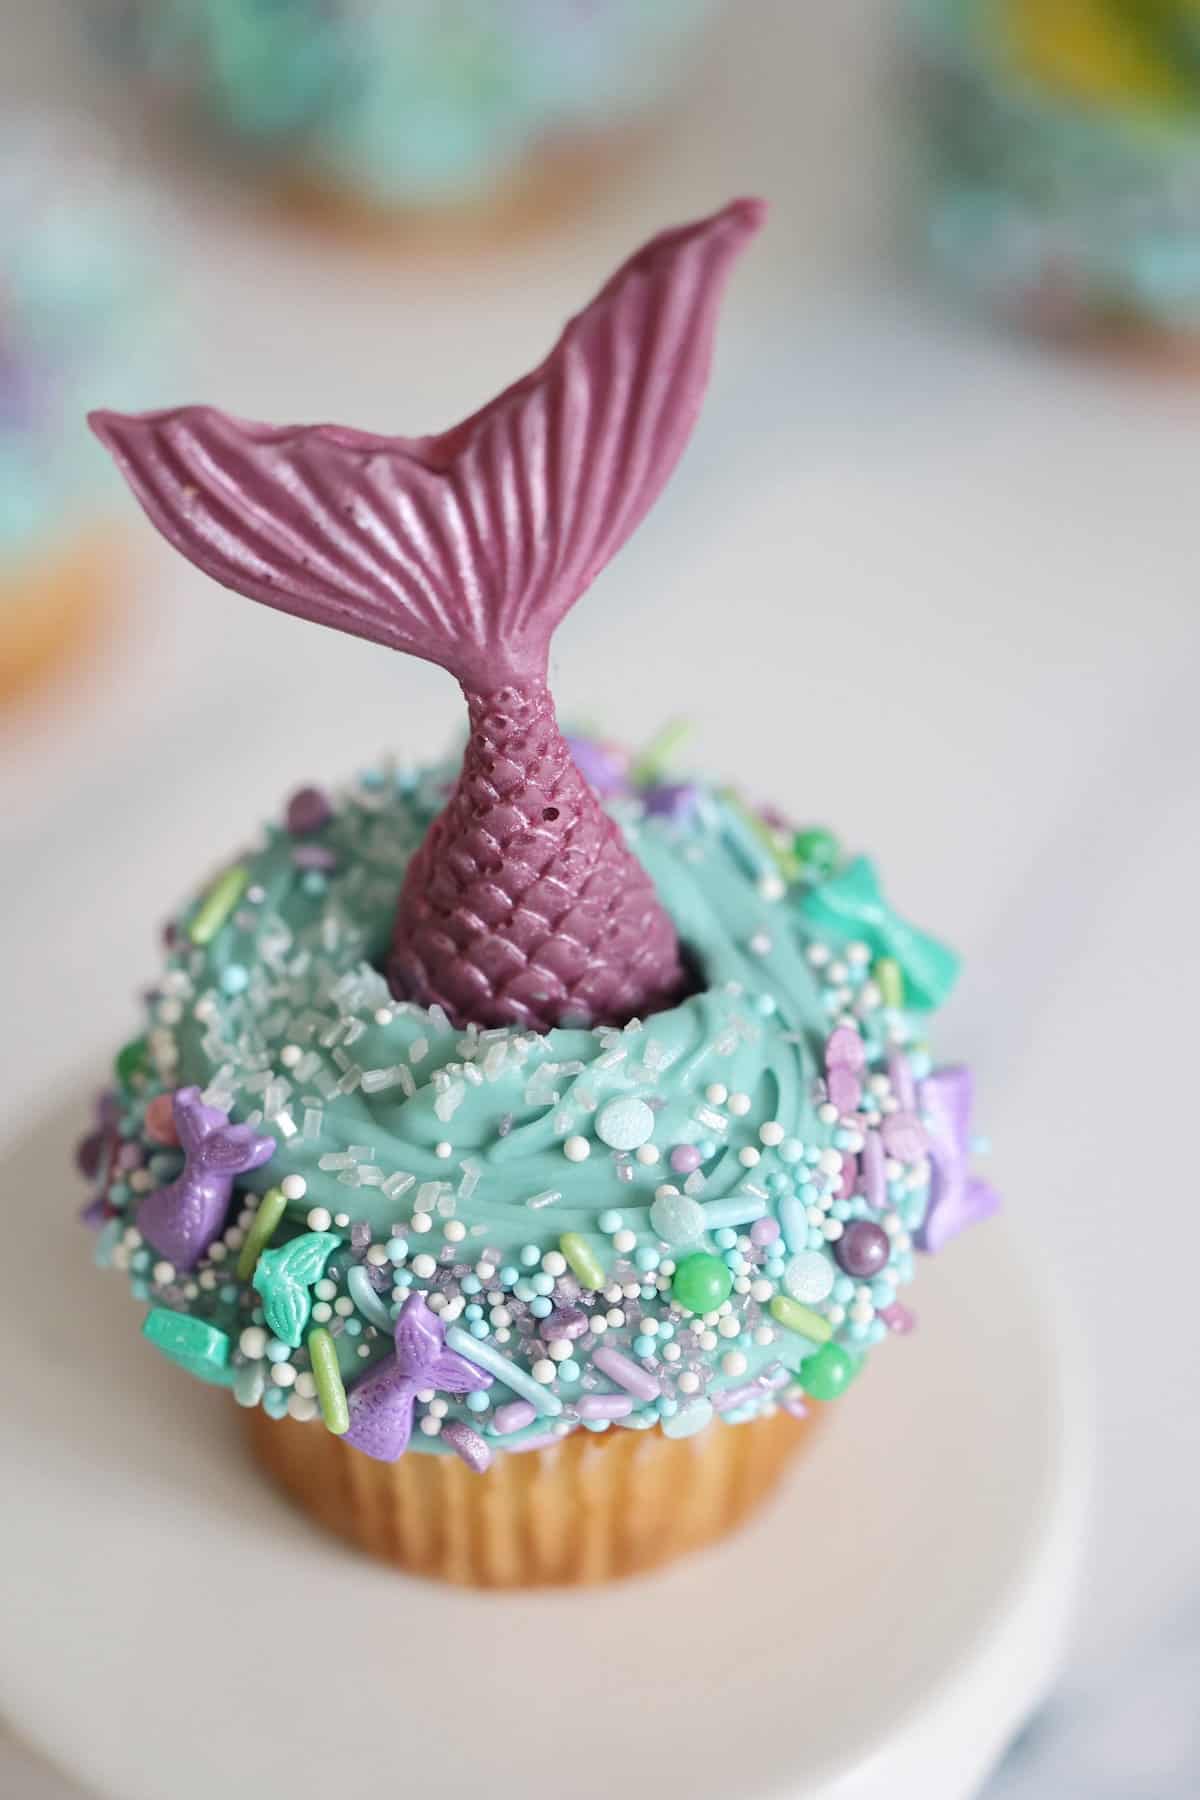 mermaid cupcake with a purple tail blue icing and mermaid sprinkles on a cake stand